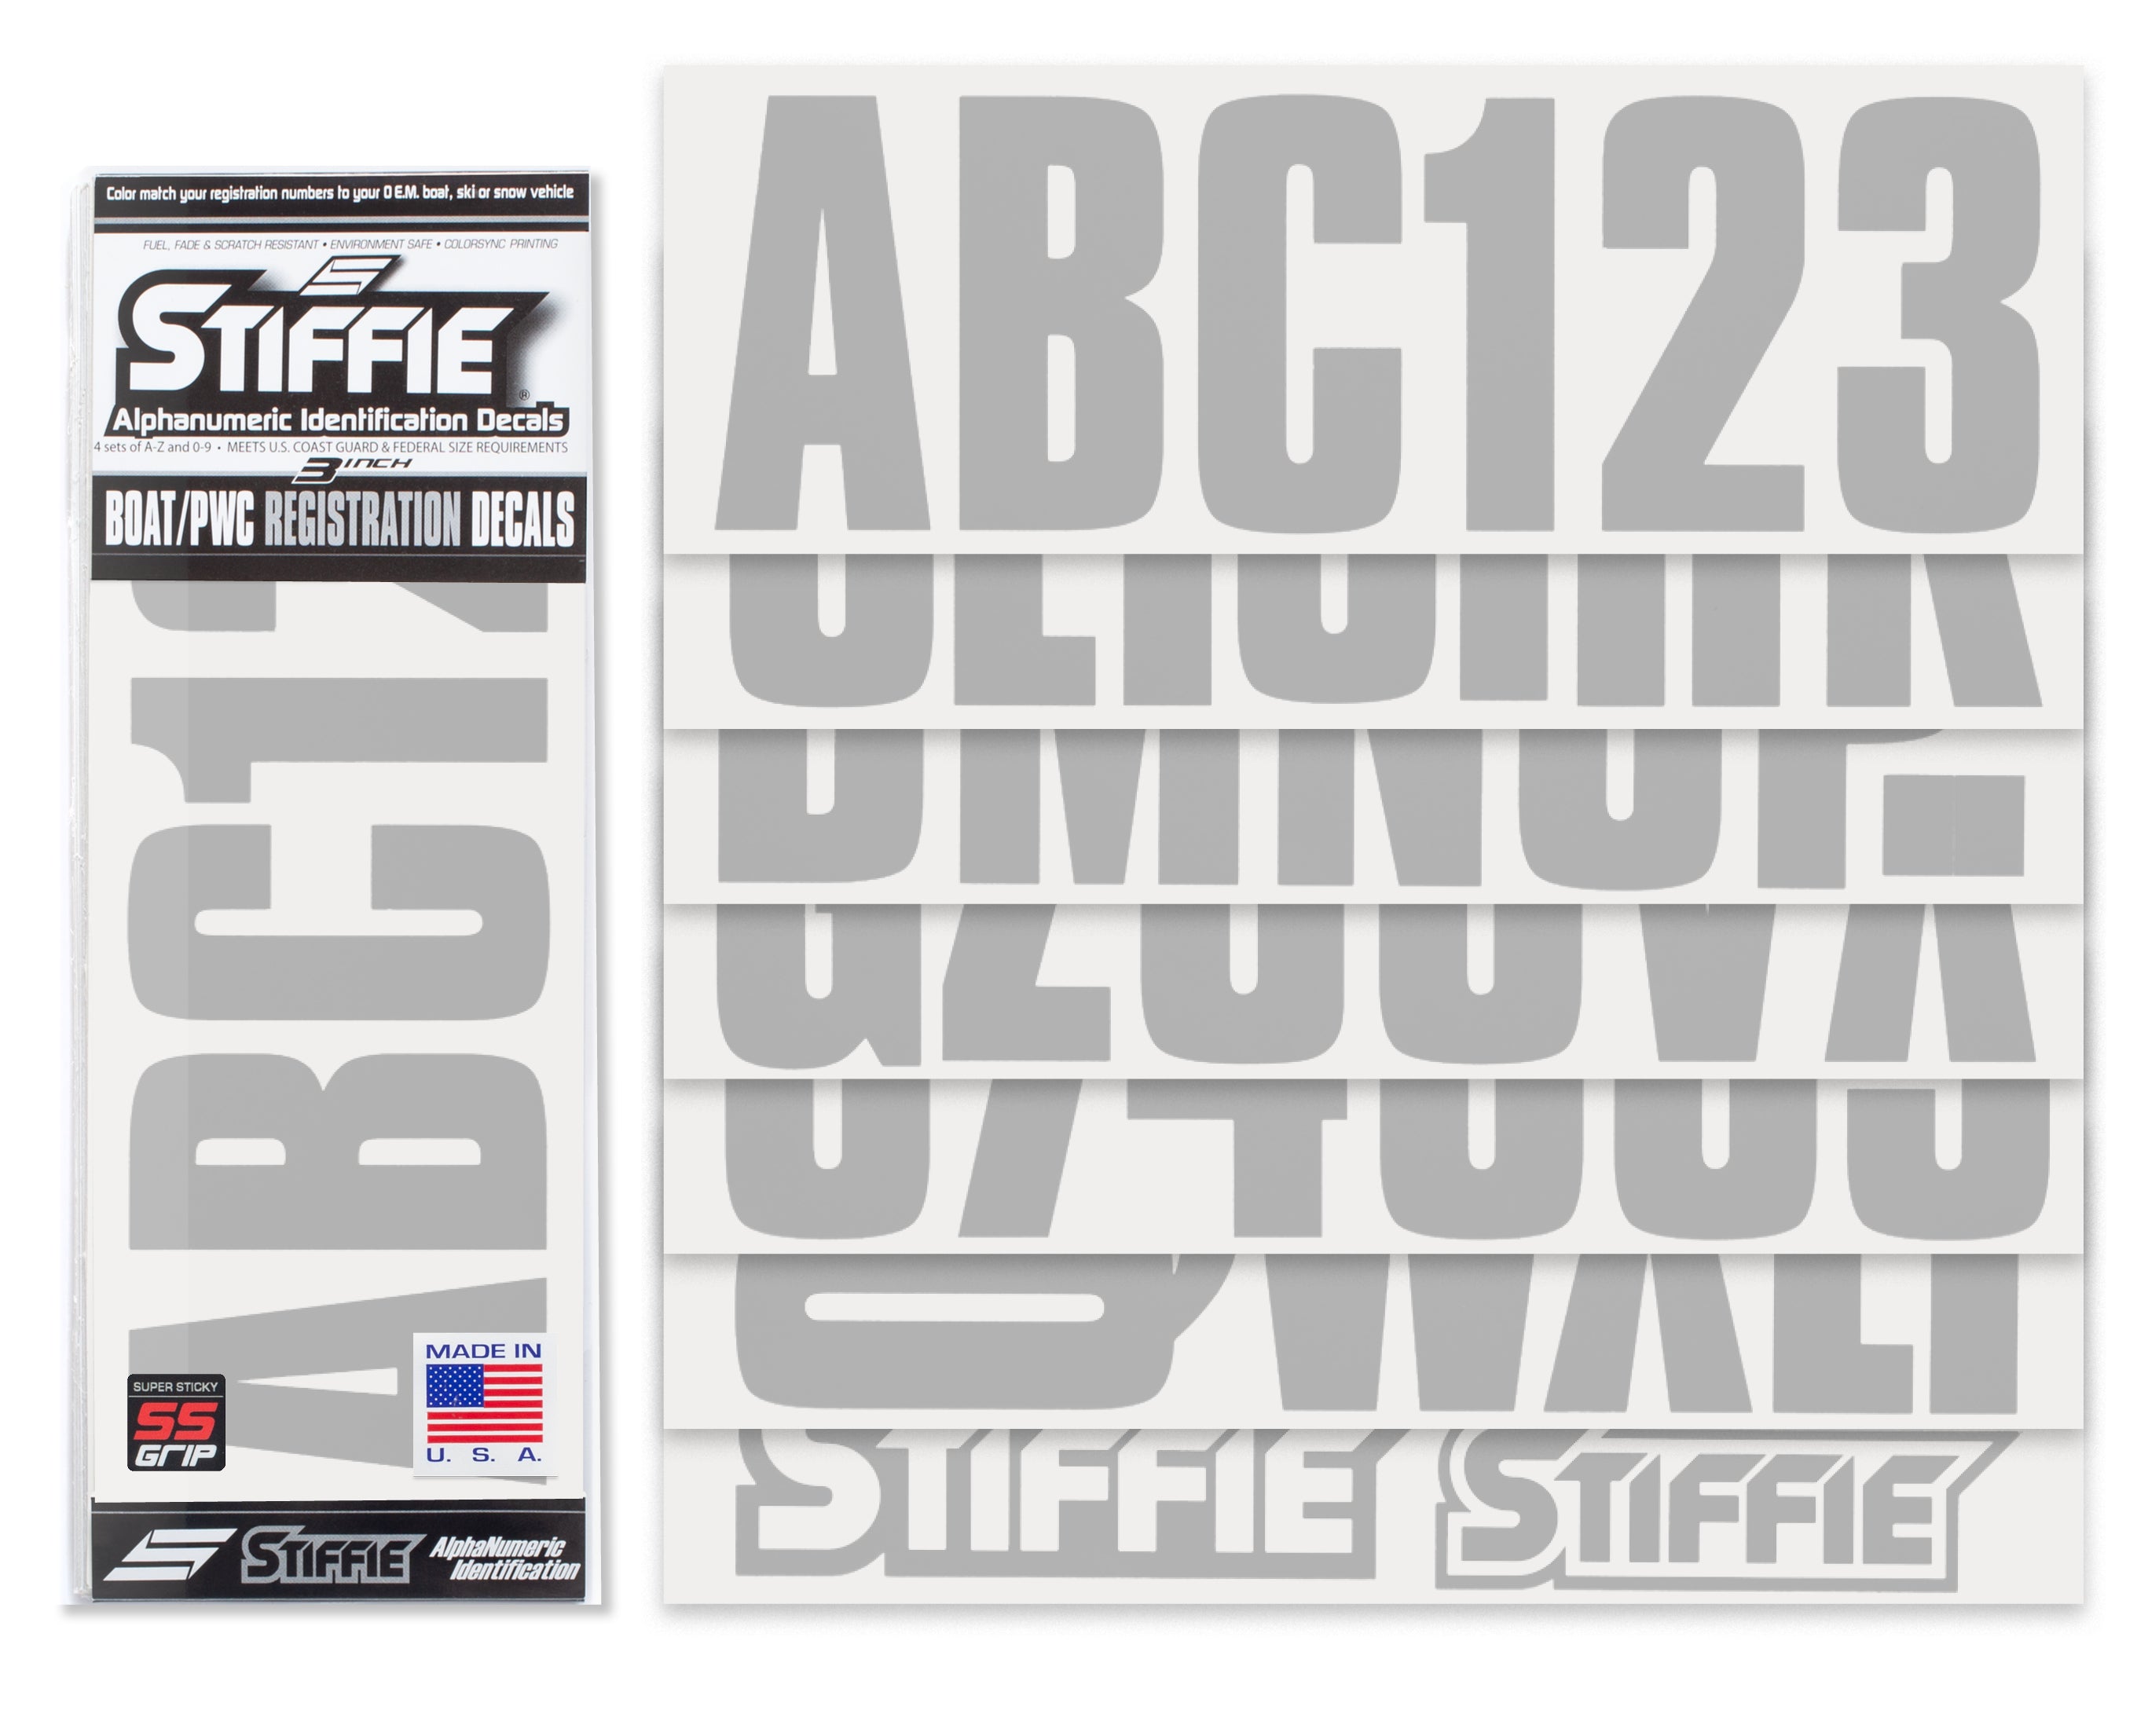 STIFFIE Uniline Silver Super Sticky 3" Alpha Numeric Registration Identification Numbers Stickers Decals for Sea-Doo Spark, Inflatable Boats, Ribs, Hypalon/PVC, PWC and Boats